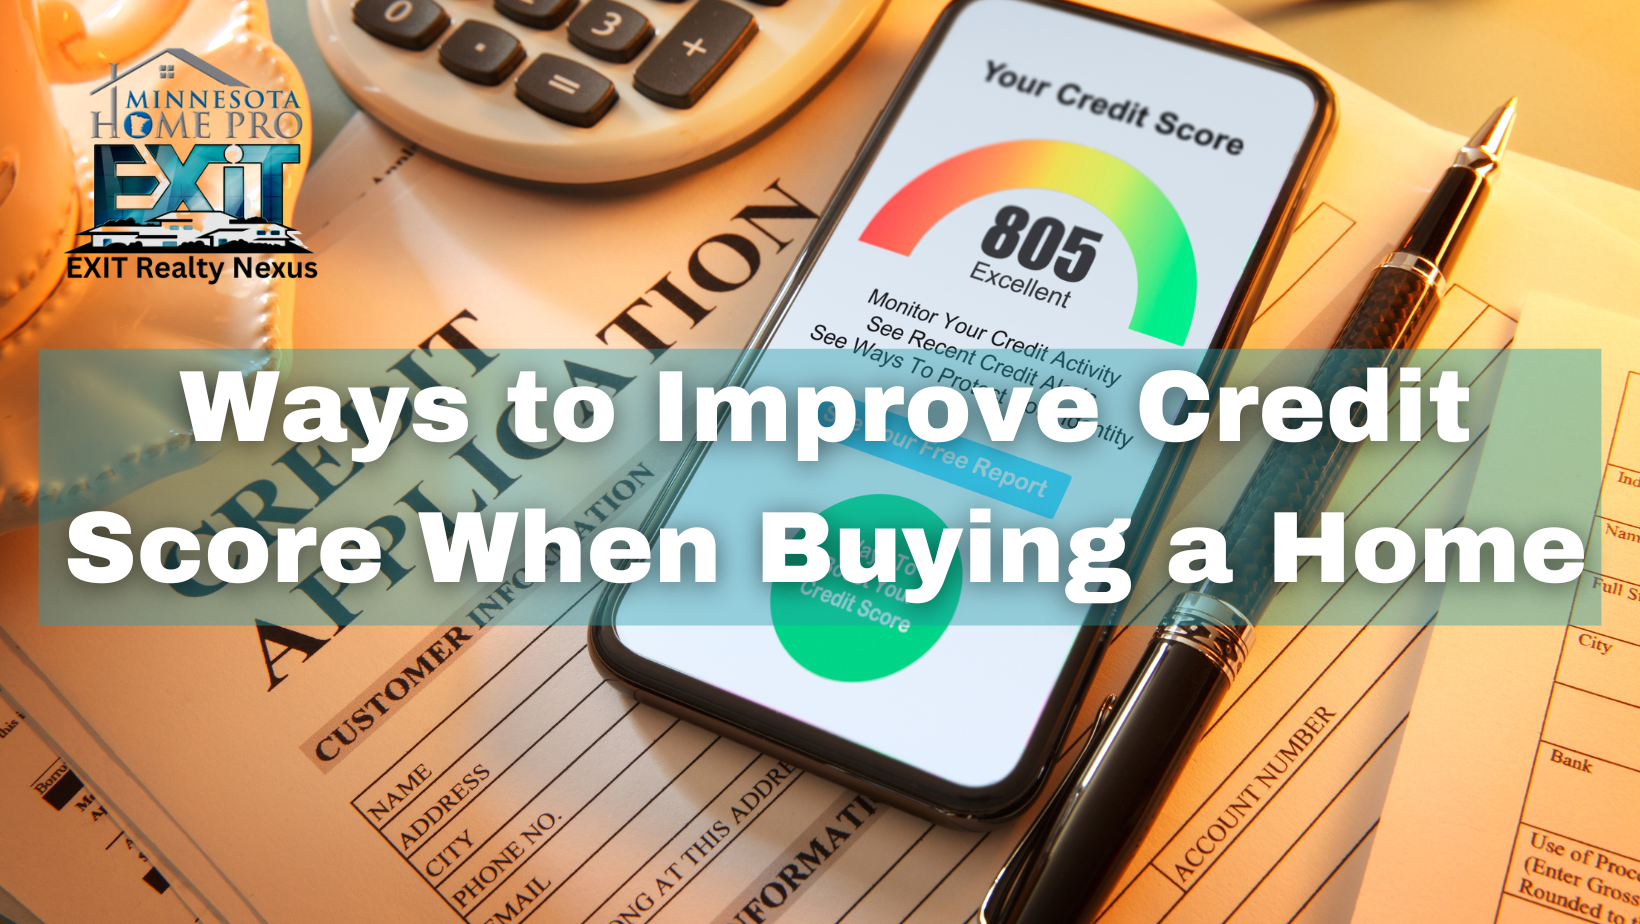 Ways to Improve Credit Score when Buying a Home